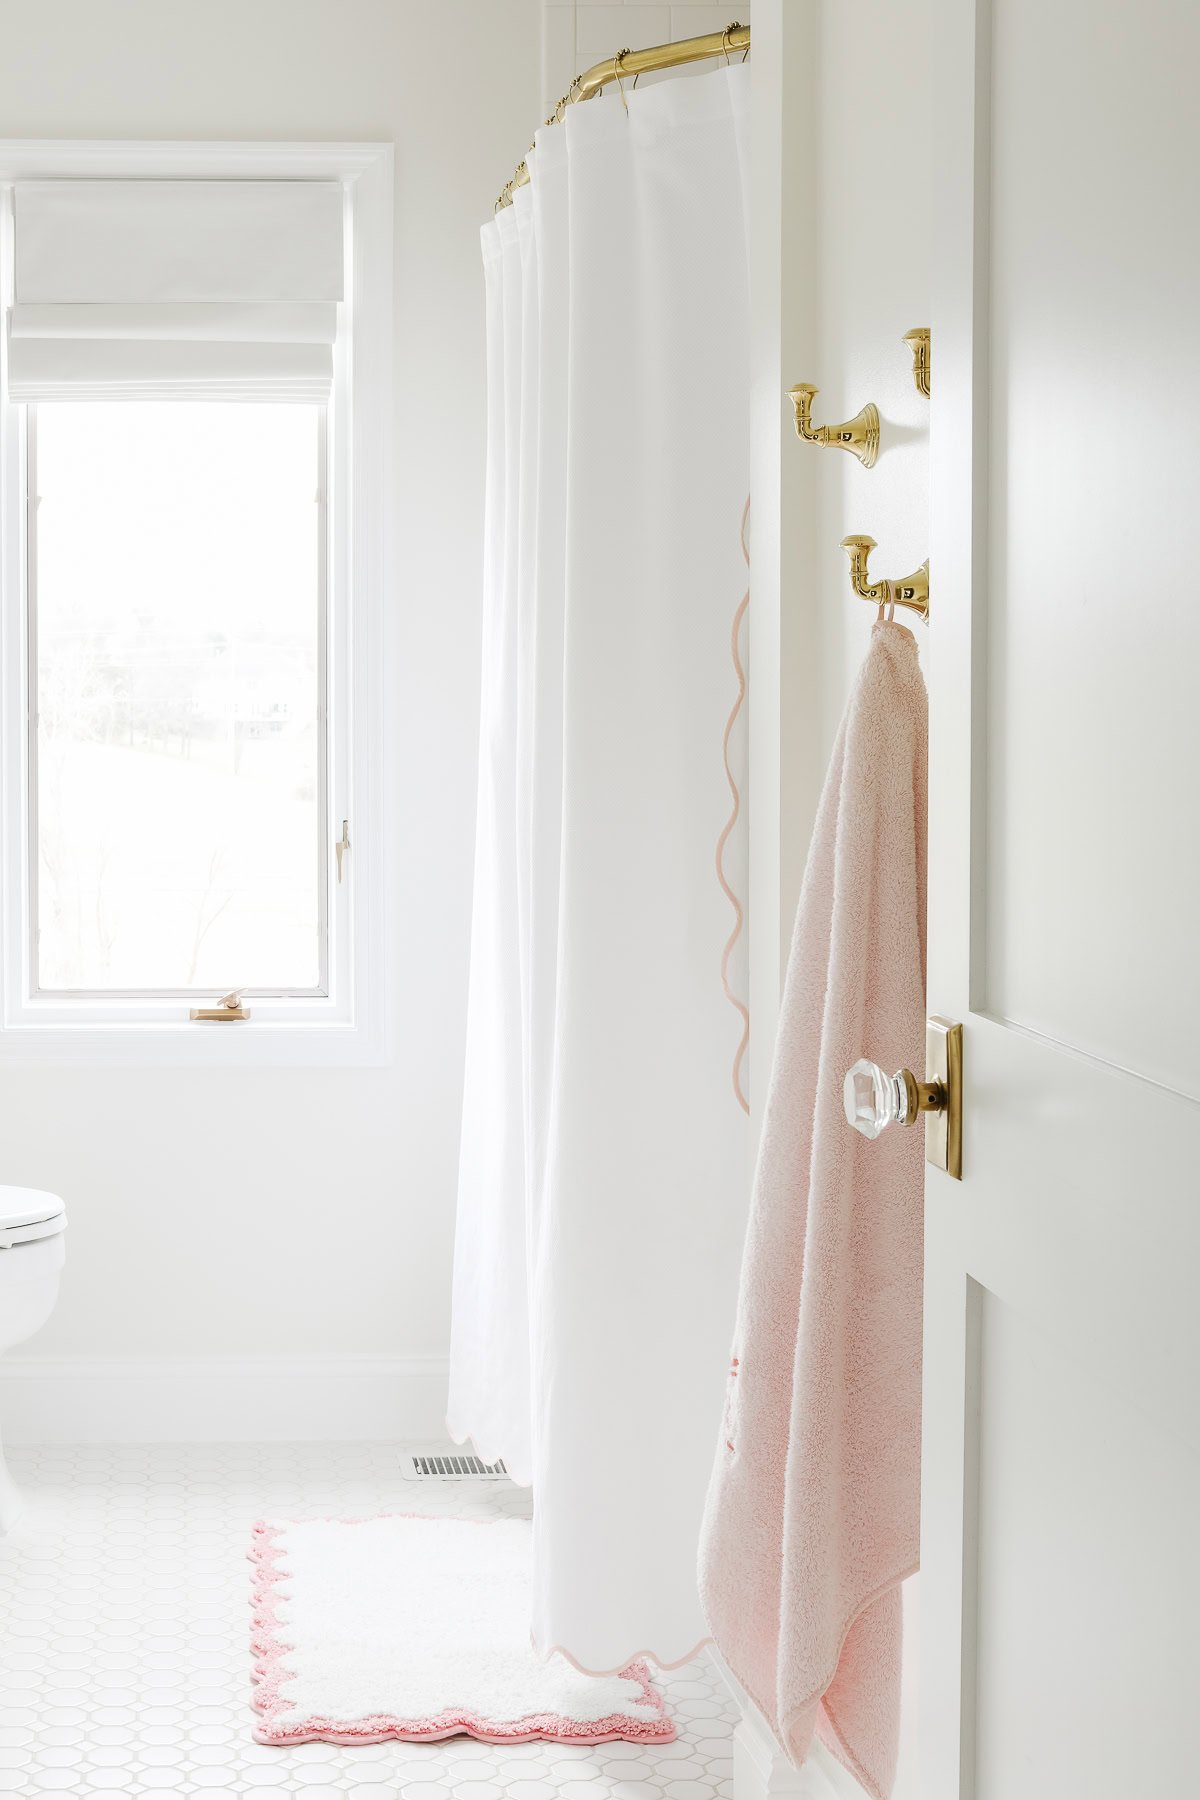 A bright bathroom interior with a white shower curtain, a hanging pink towel, and a white door partially open, revealing brass door knobs, a toilet and a window with a view outside.